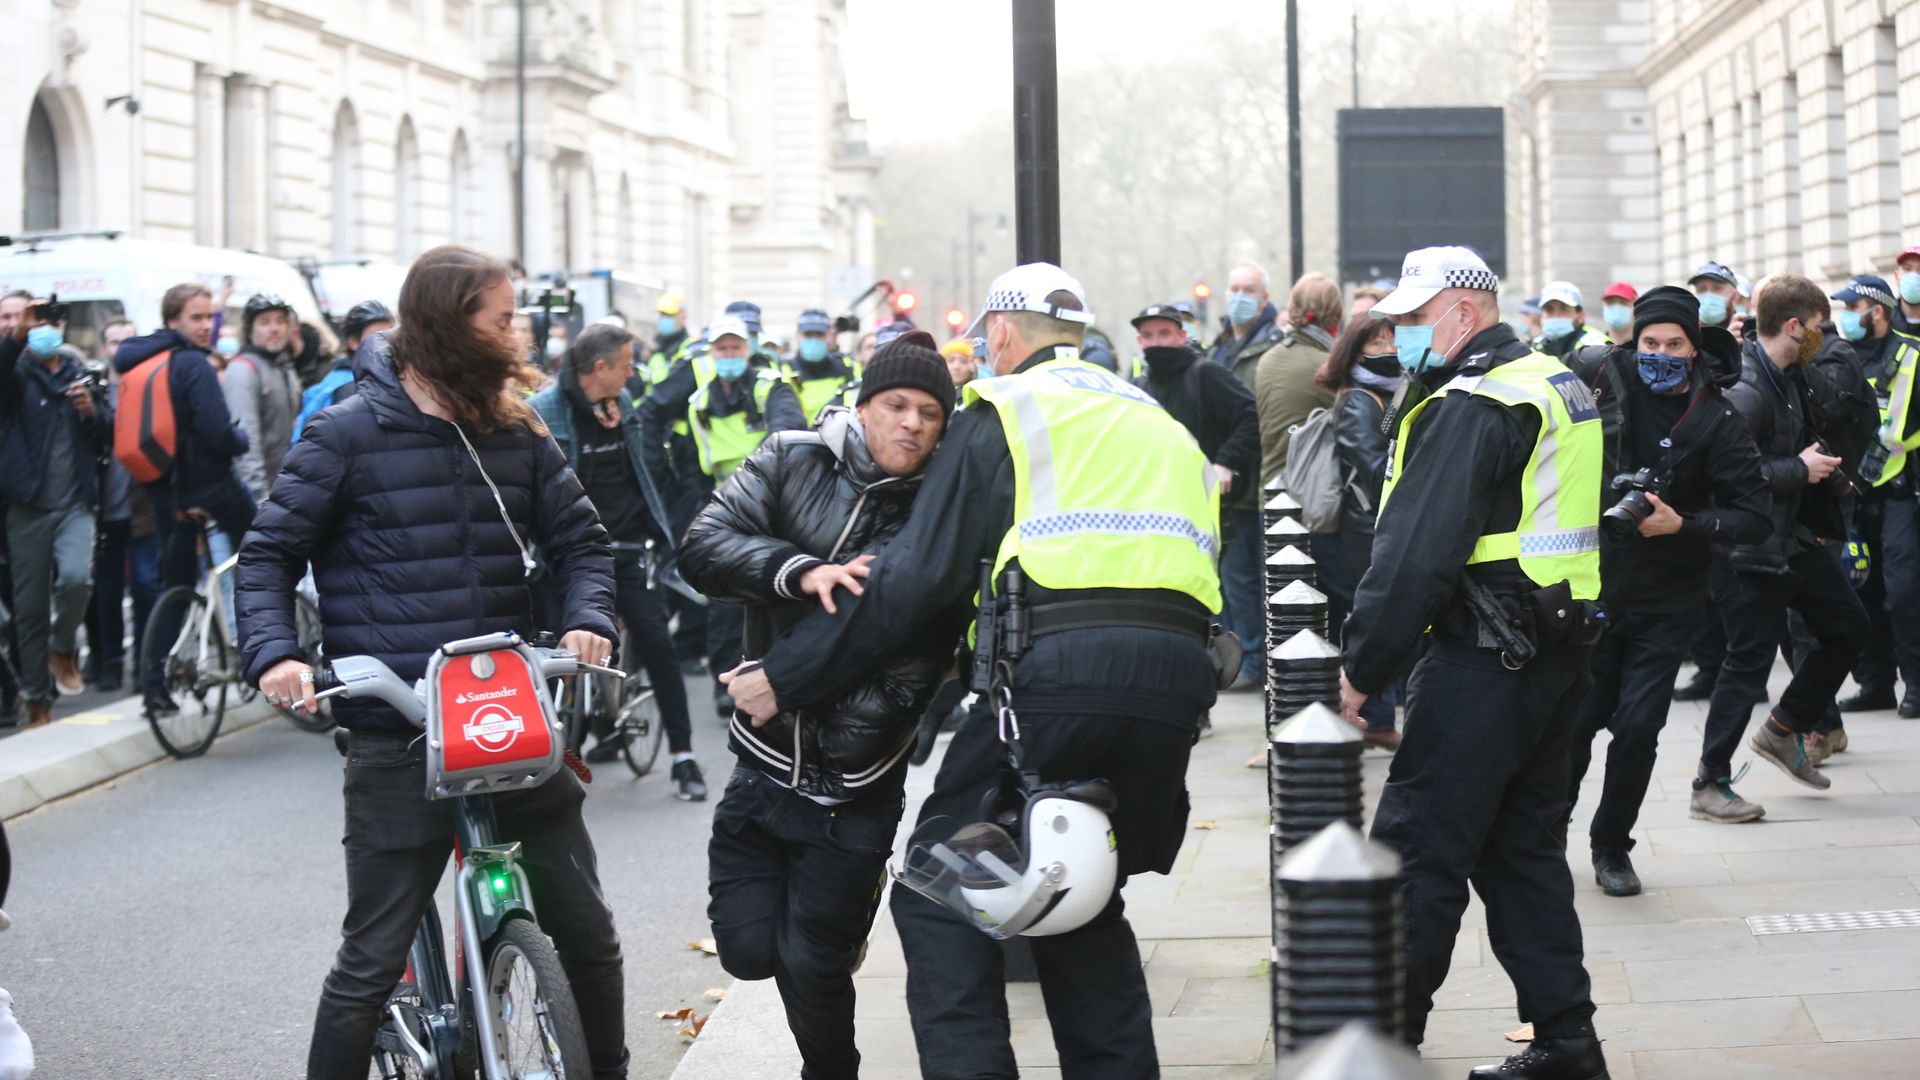 Police officers intervene a protestor as anti-lockdown and anti-vaccine protesters stage a march in central London, England 